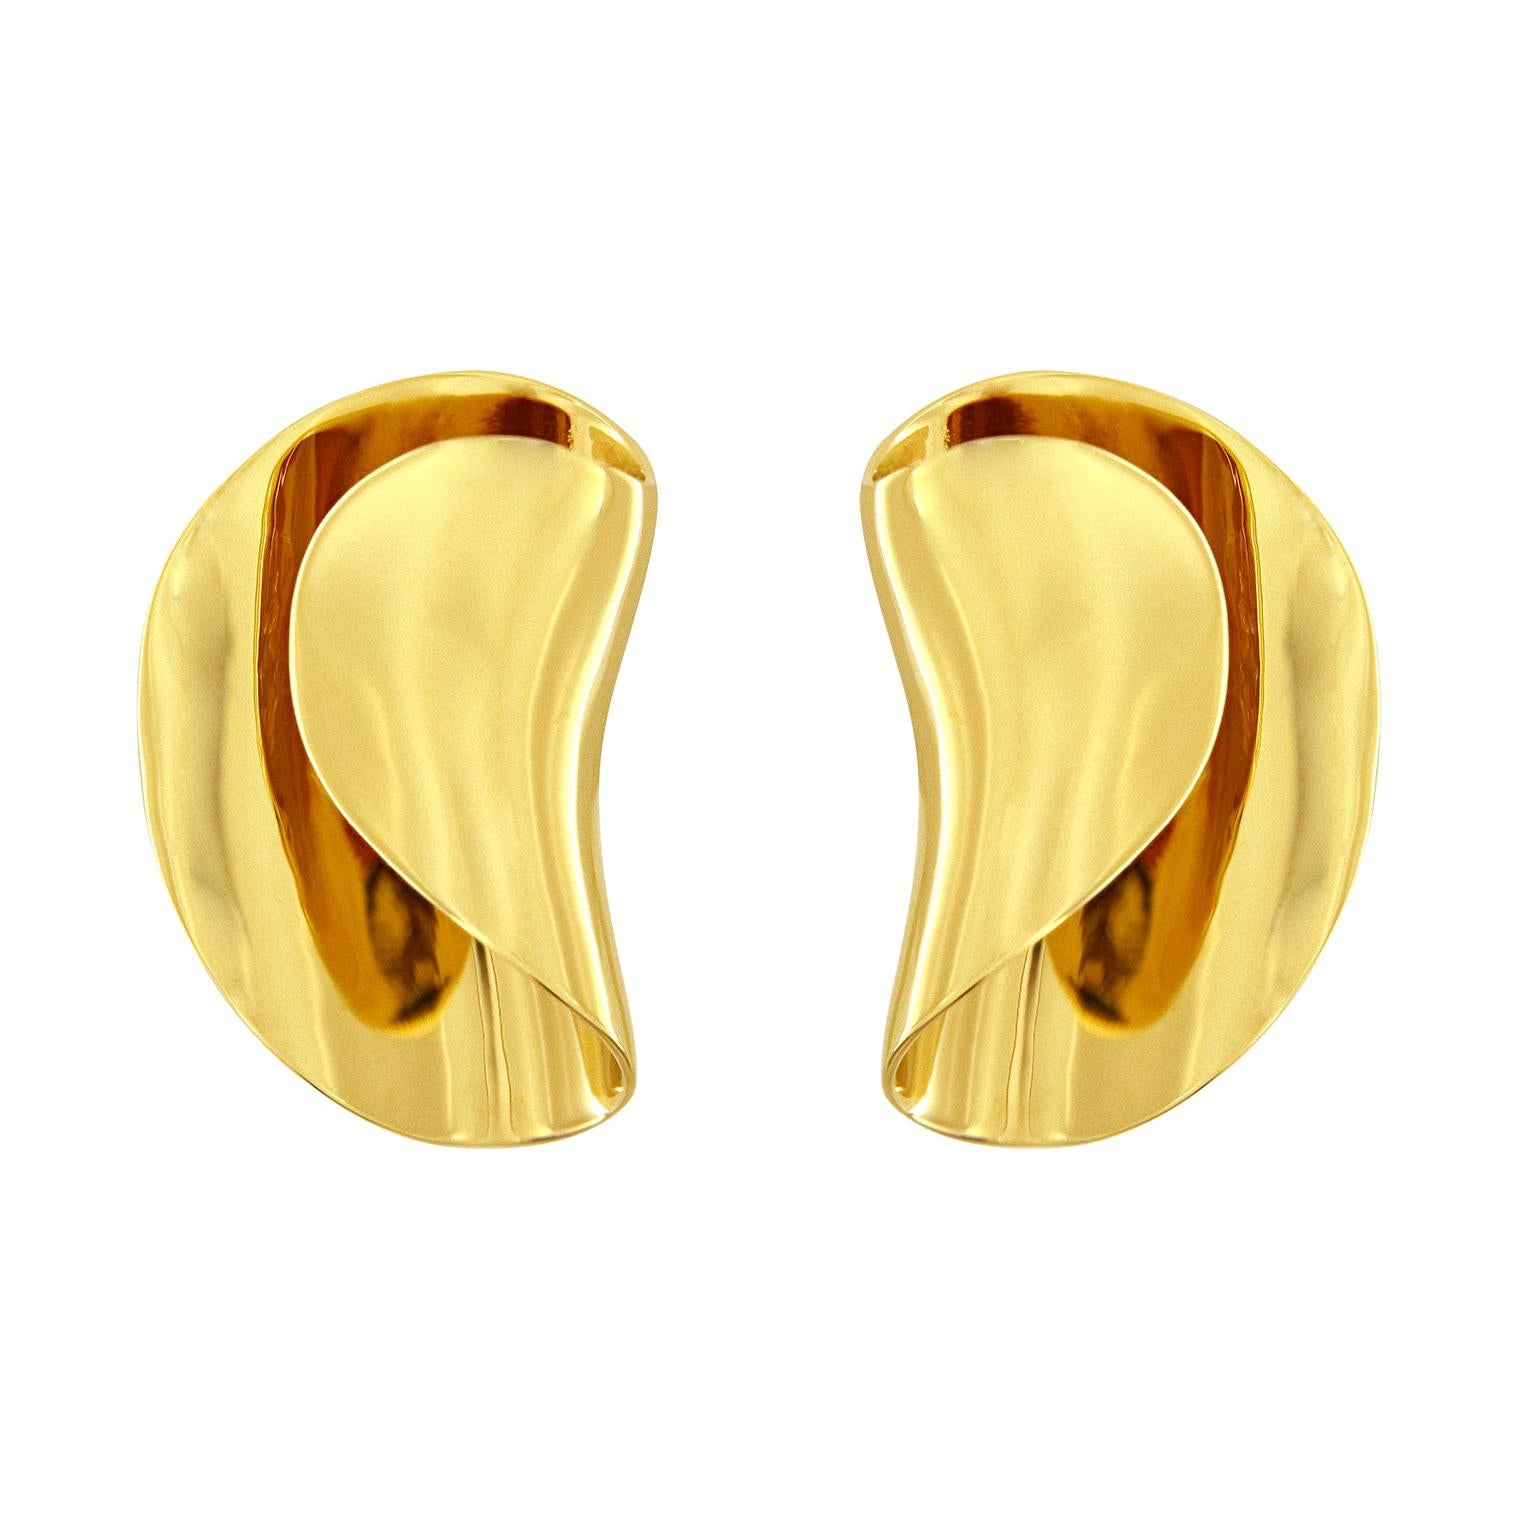 Valentin Magro Fold Over Yellow Gold Earrings